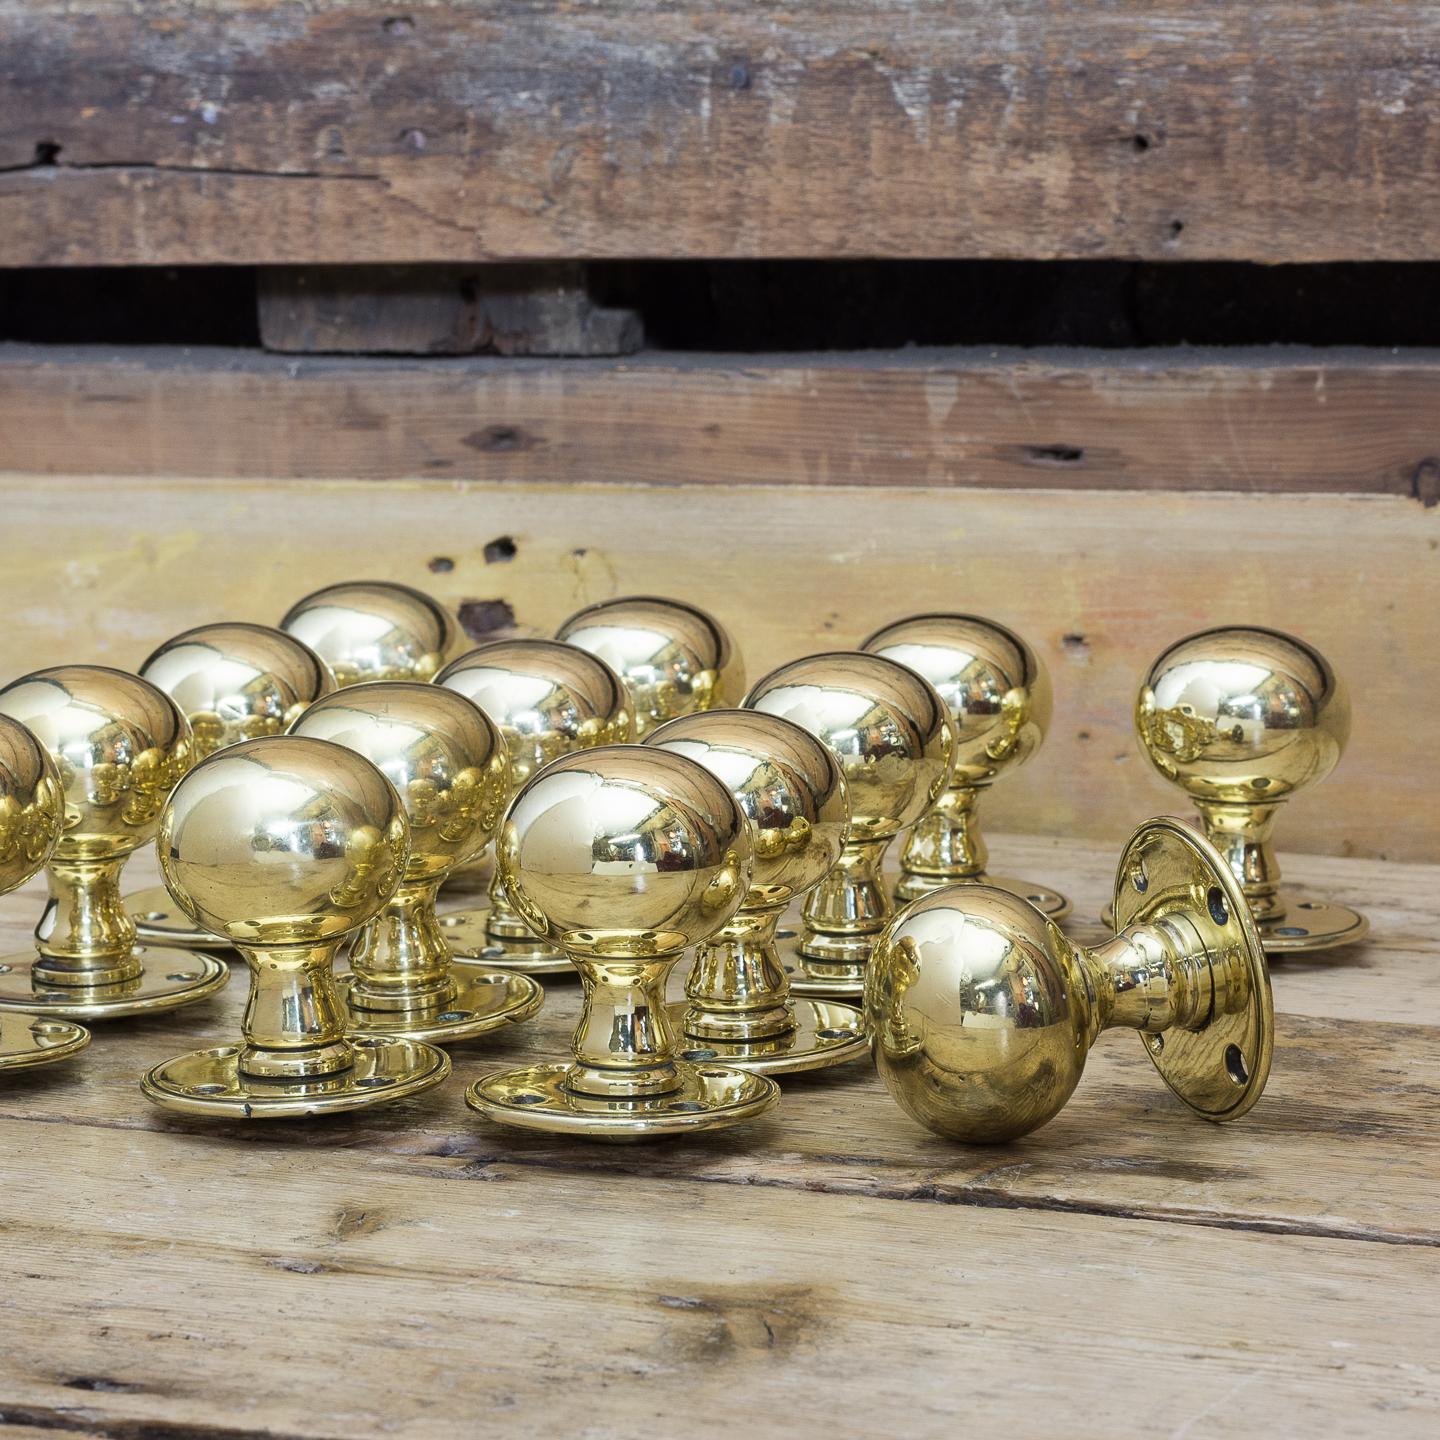 Late Victorian spherical brass door knobs on circular backplates. Four pairs available.